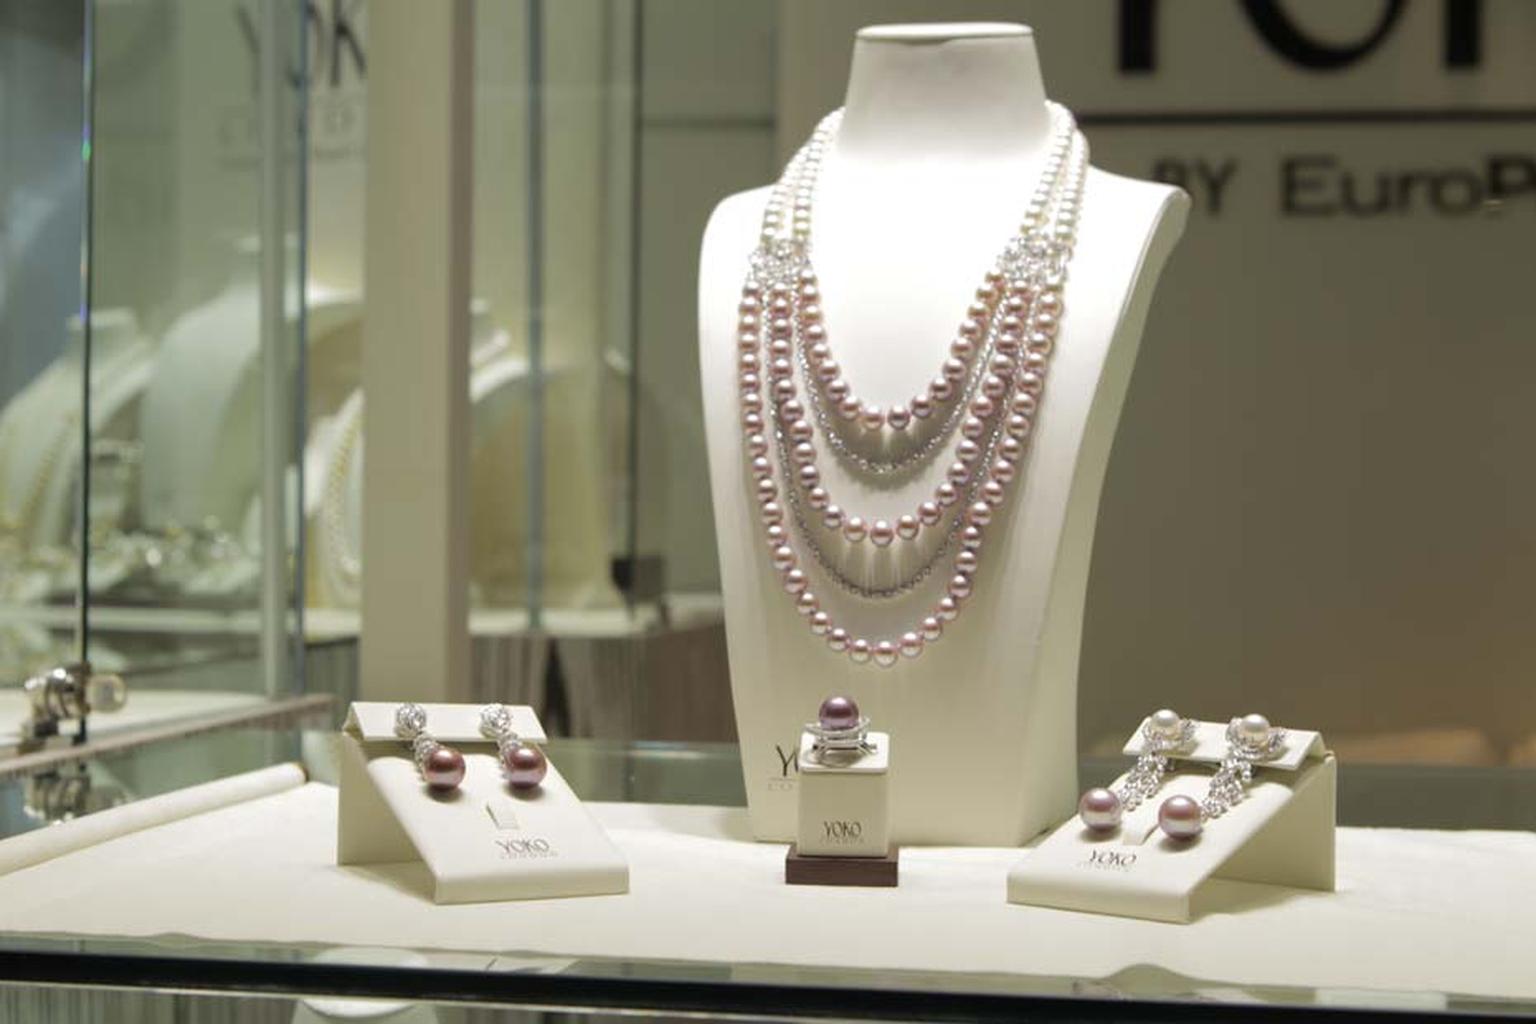 Yoko London's rare purple pearls are hard to miss and easy to appreciate